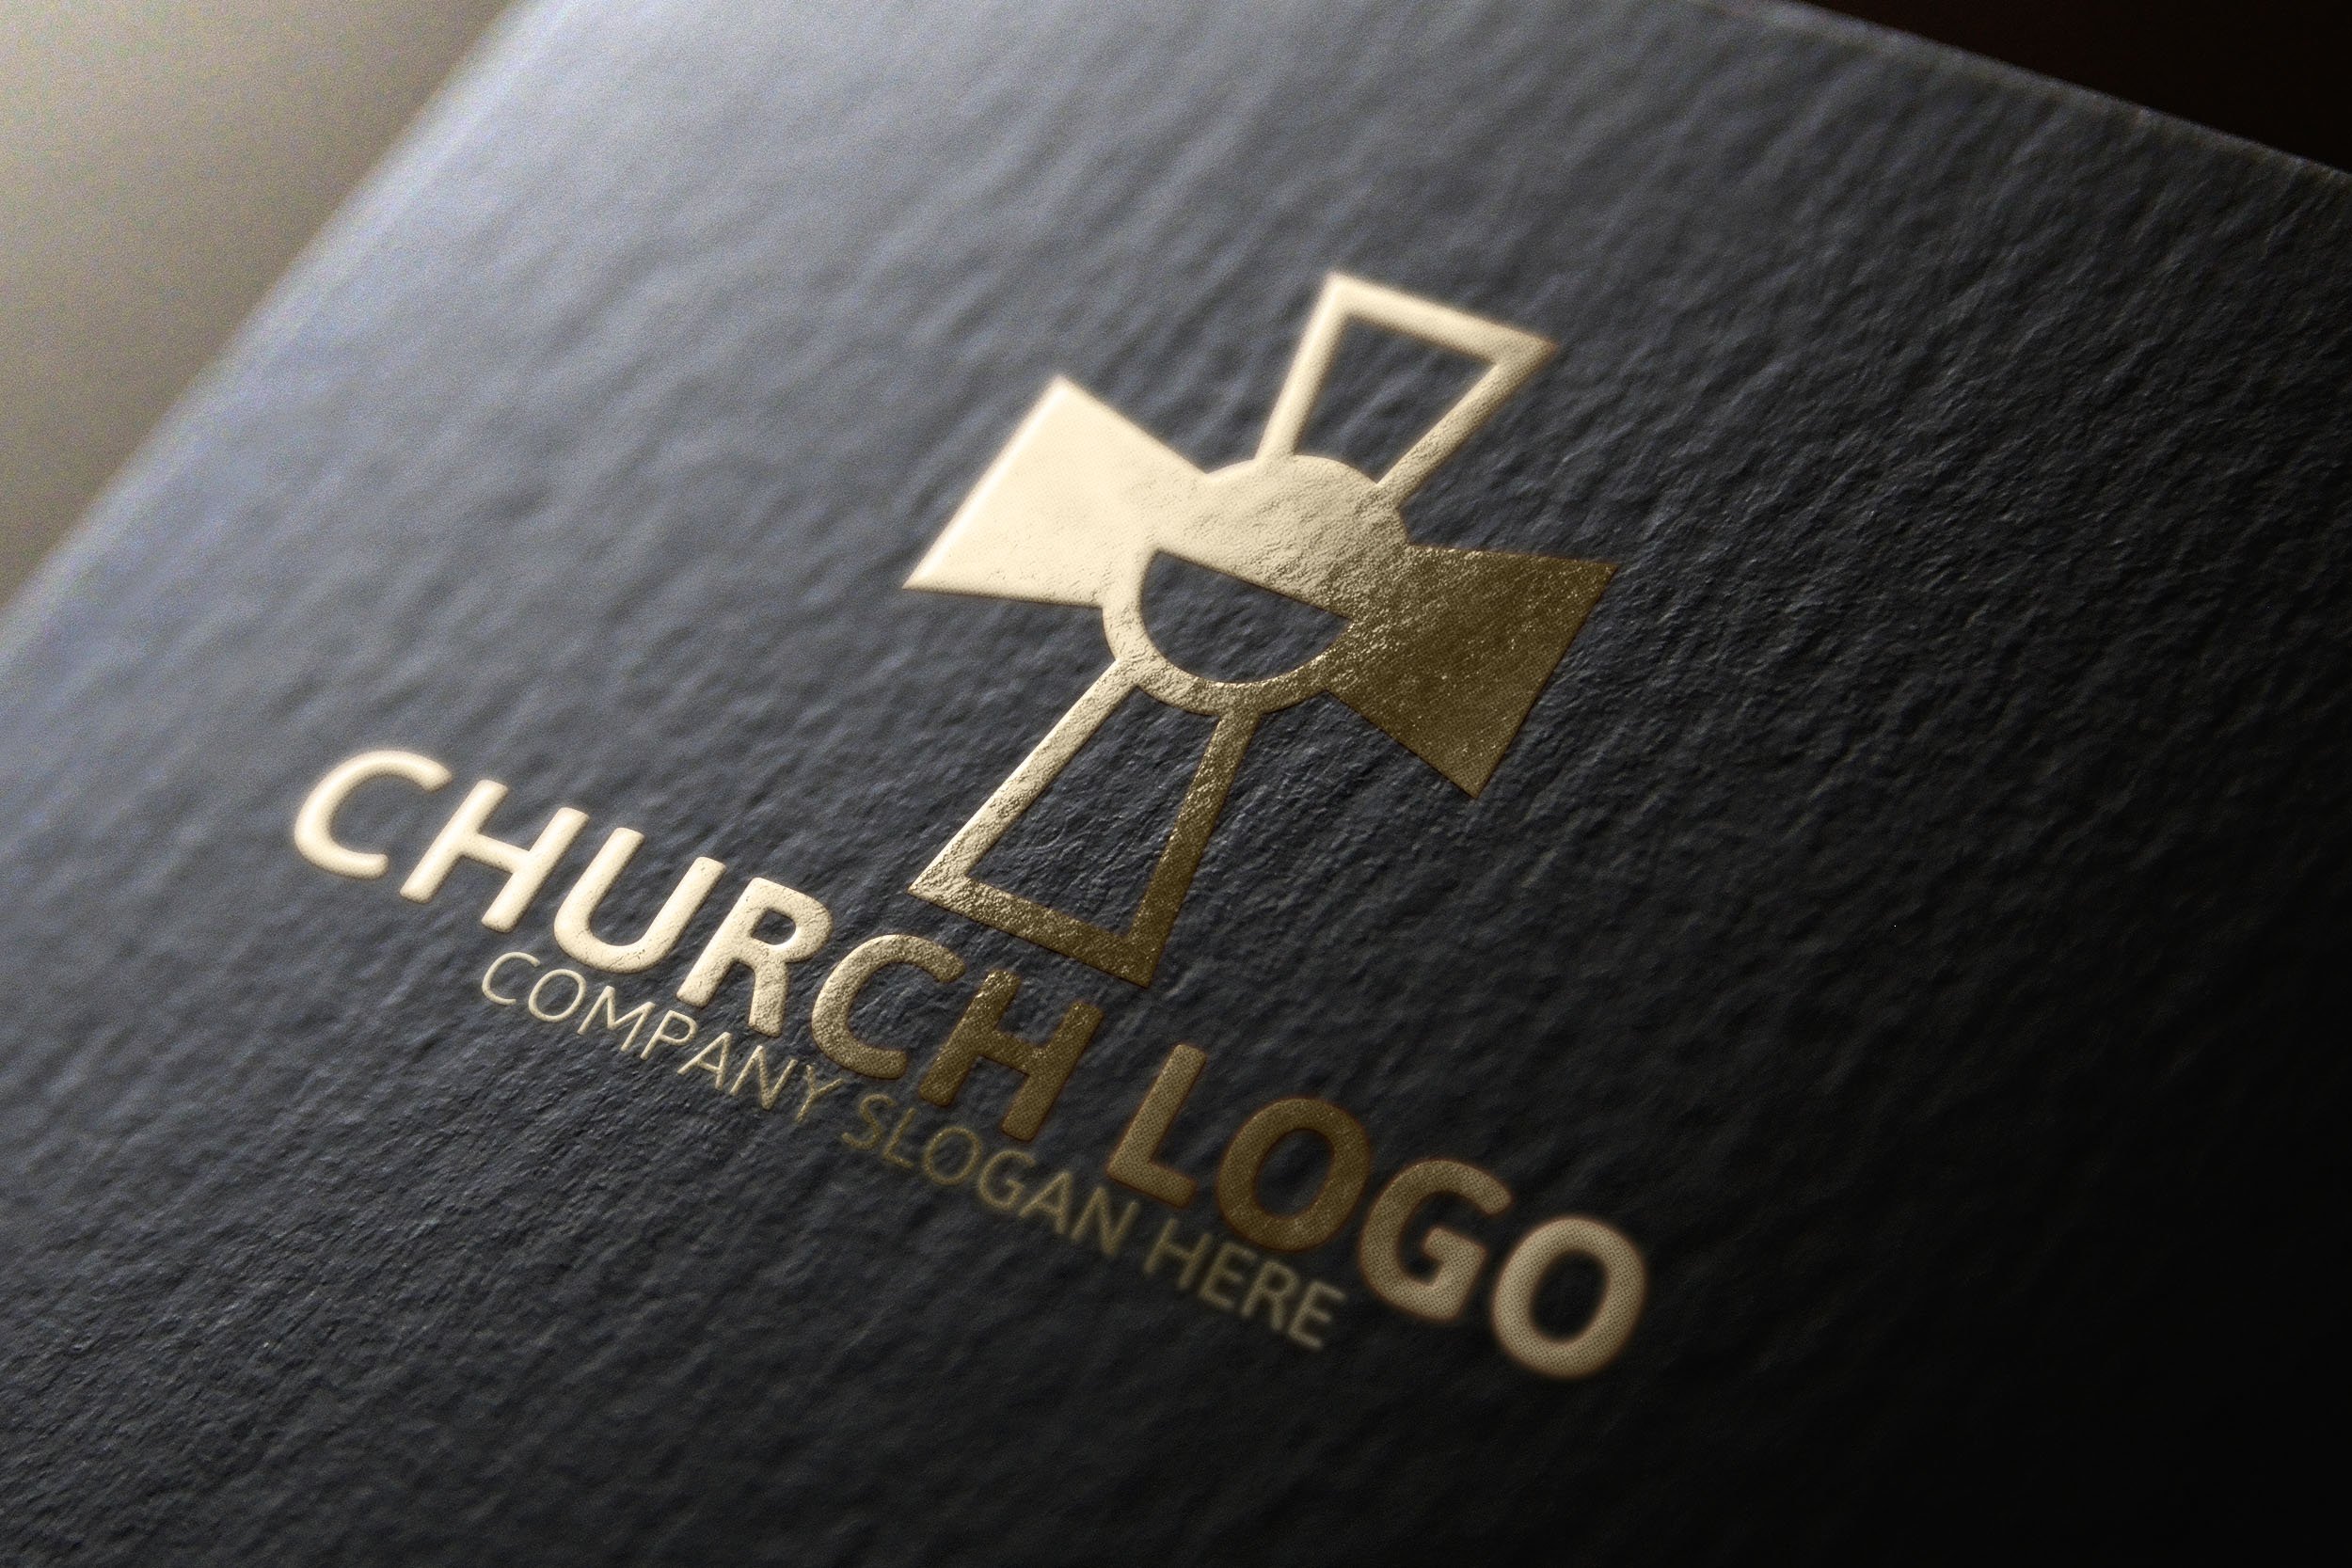 Leather background with a gold cross logo.